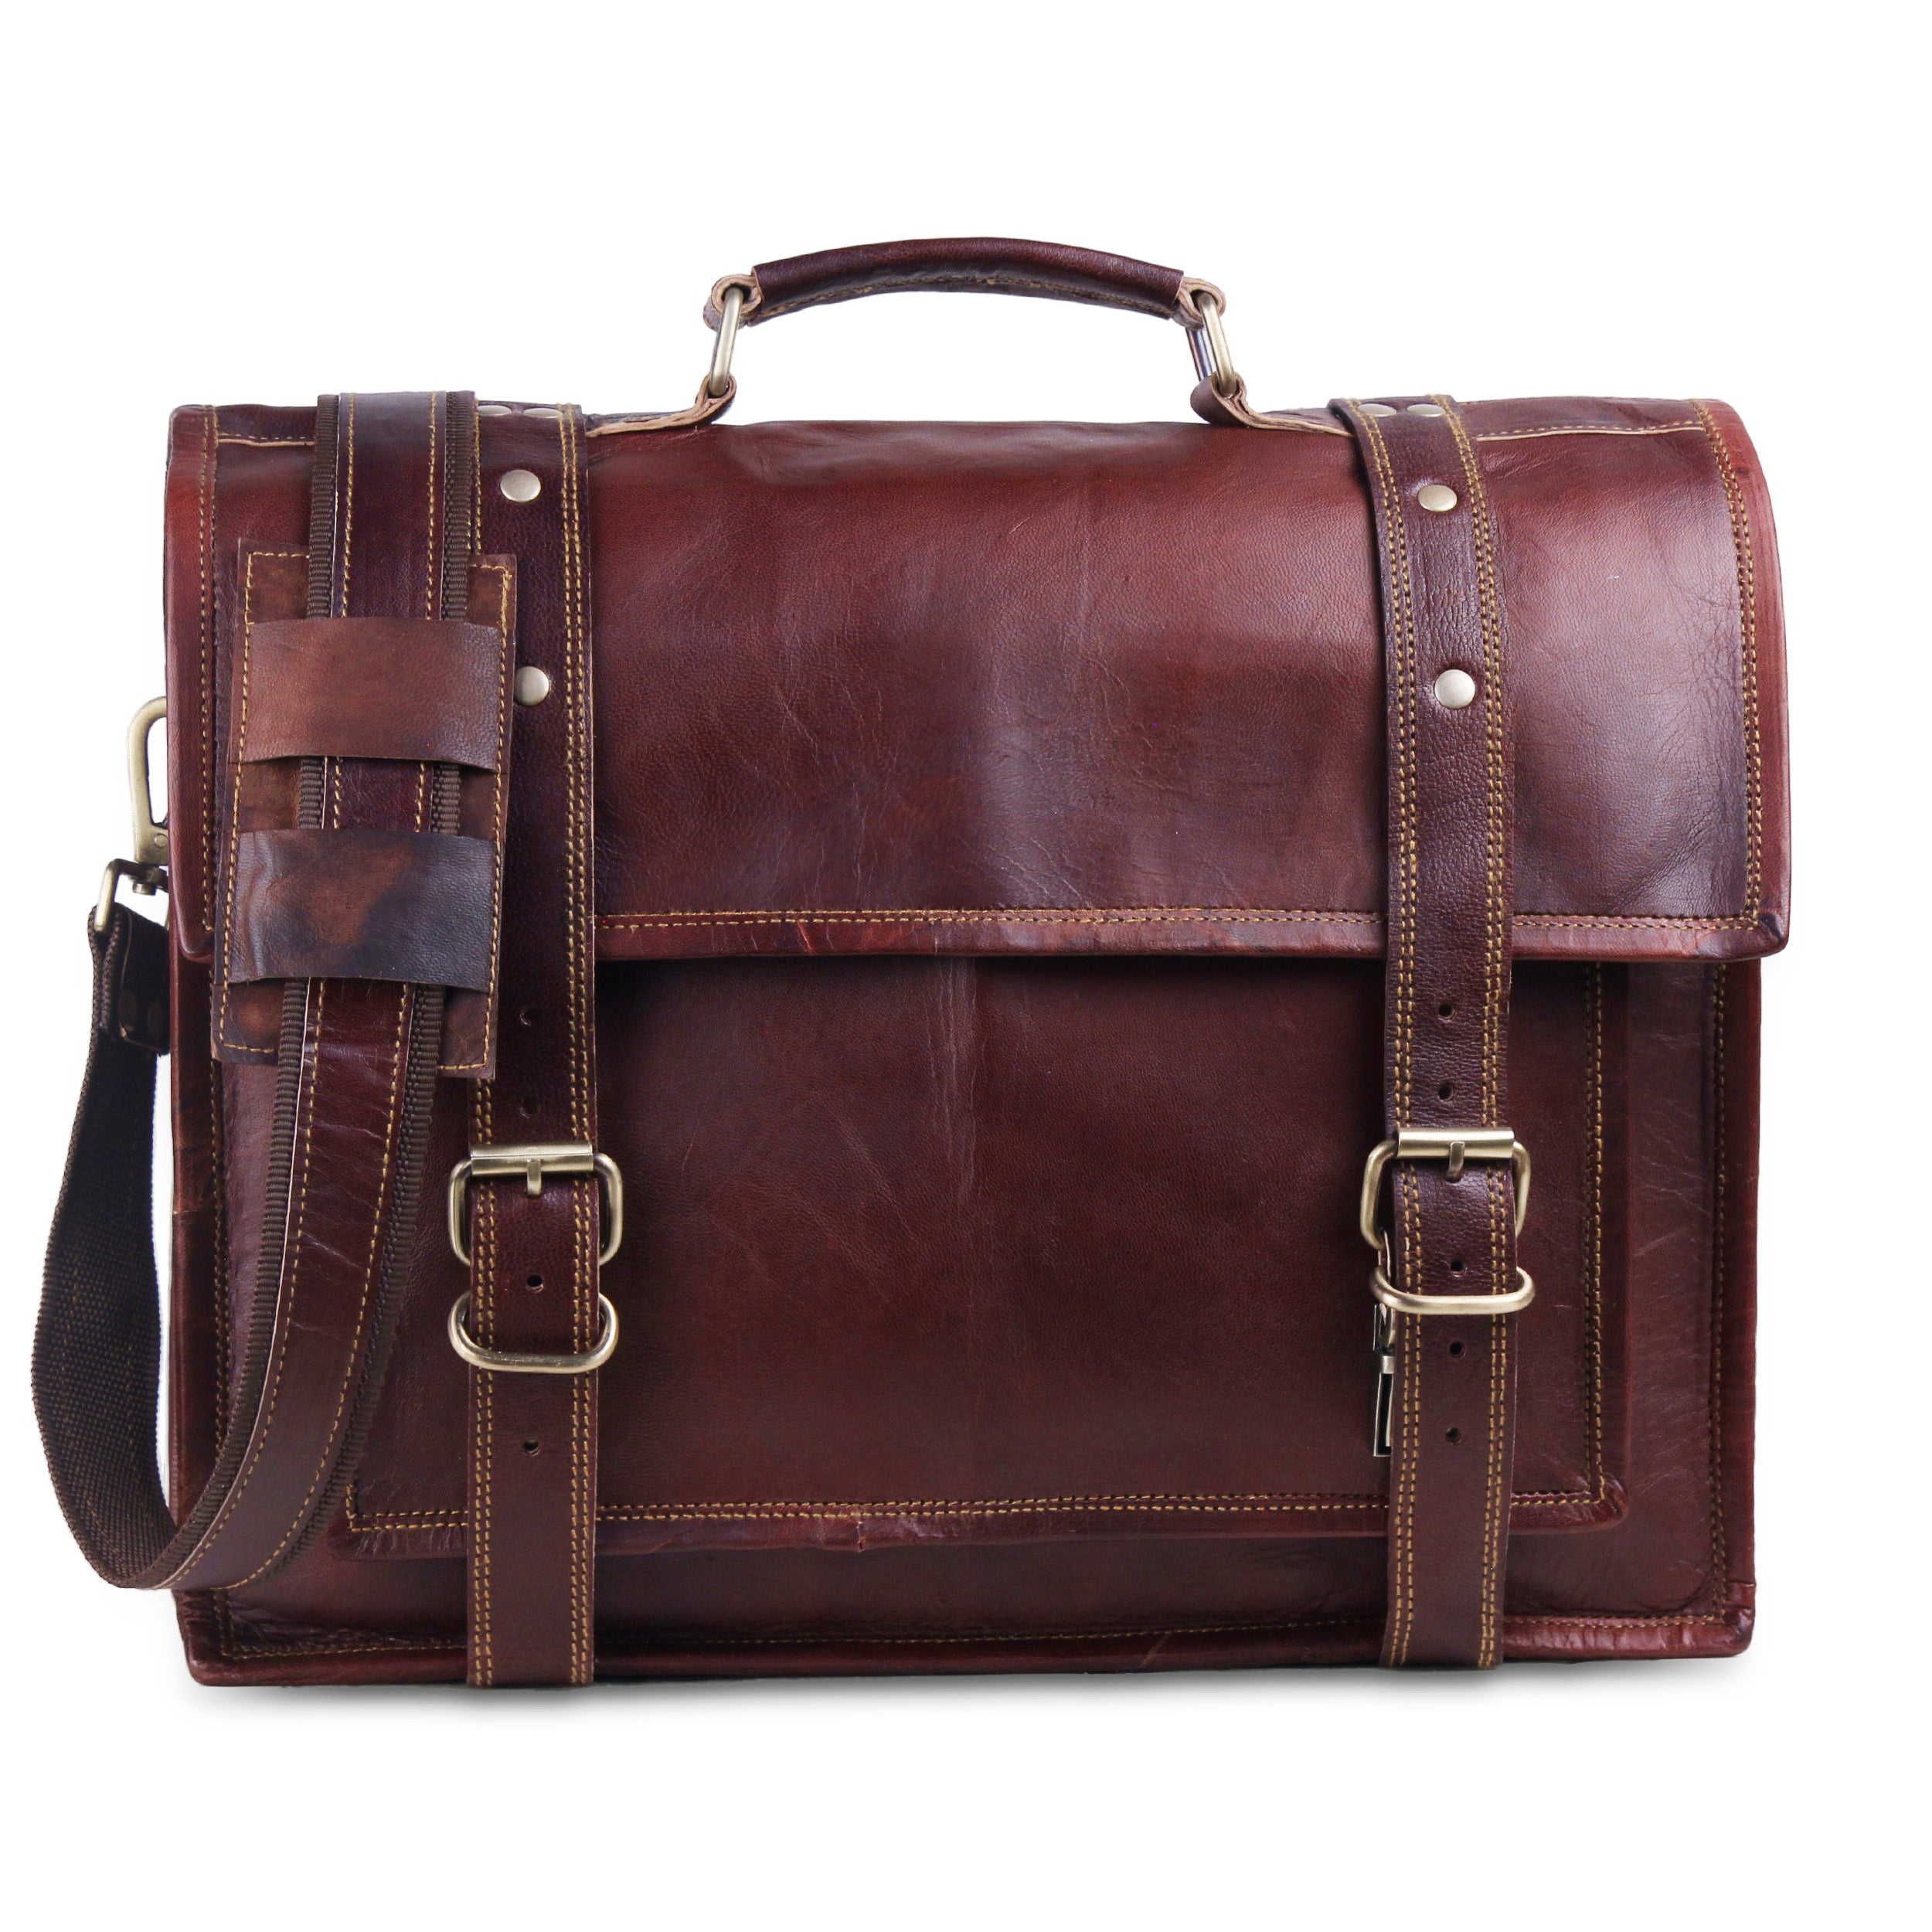 Front View of Genuine Leather Top Handle Messenger Bag